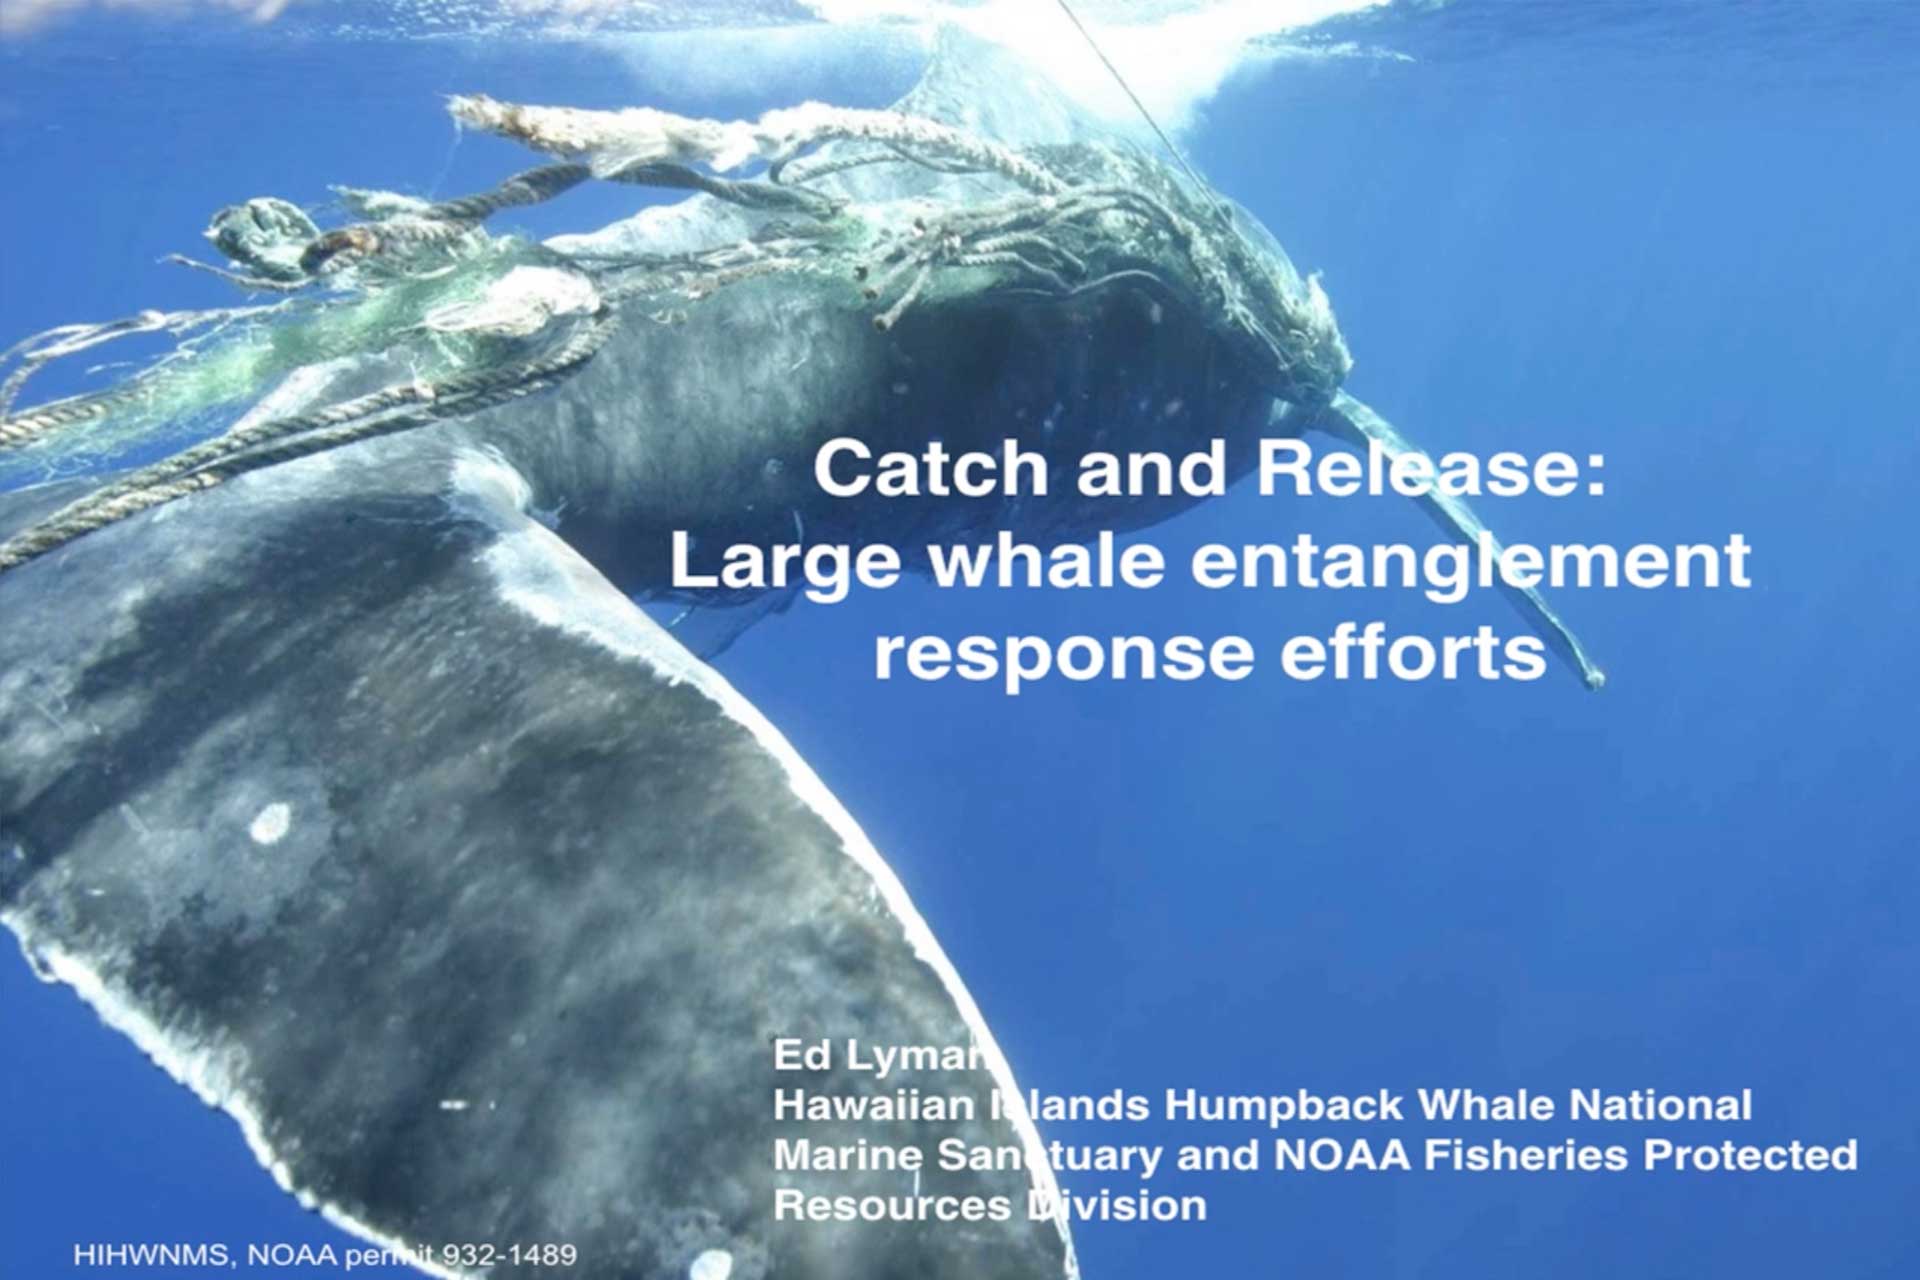 Science Series — Catch and Release Whale Disentanglement